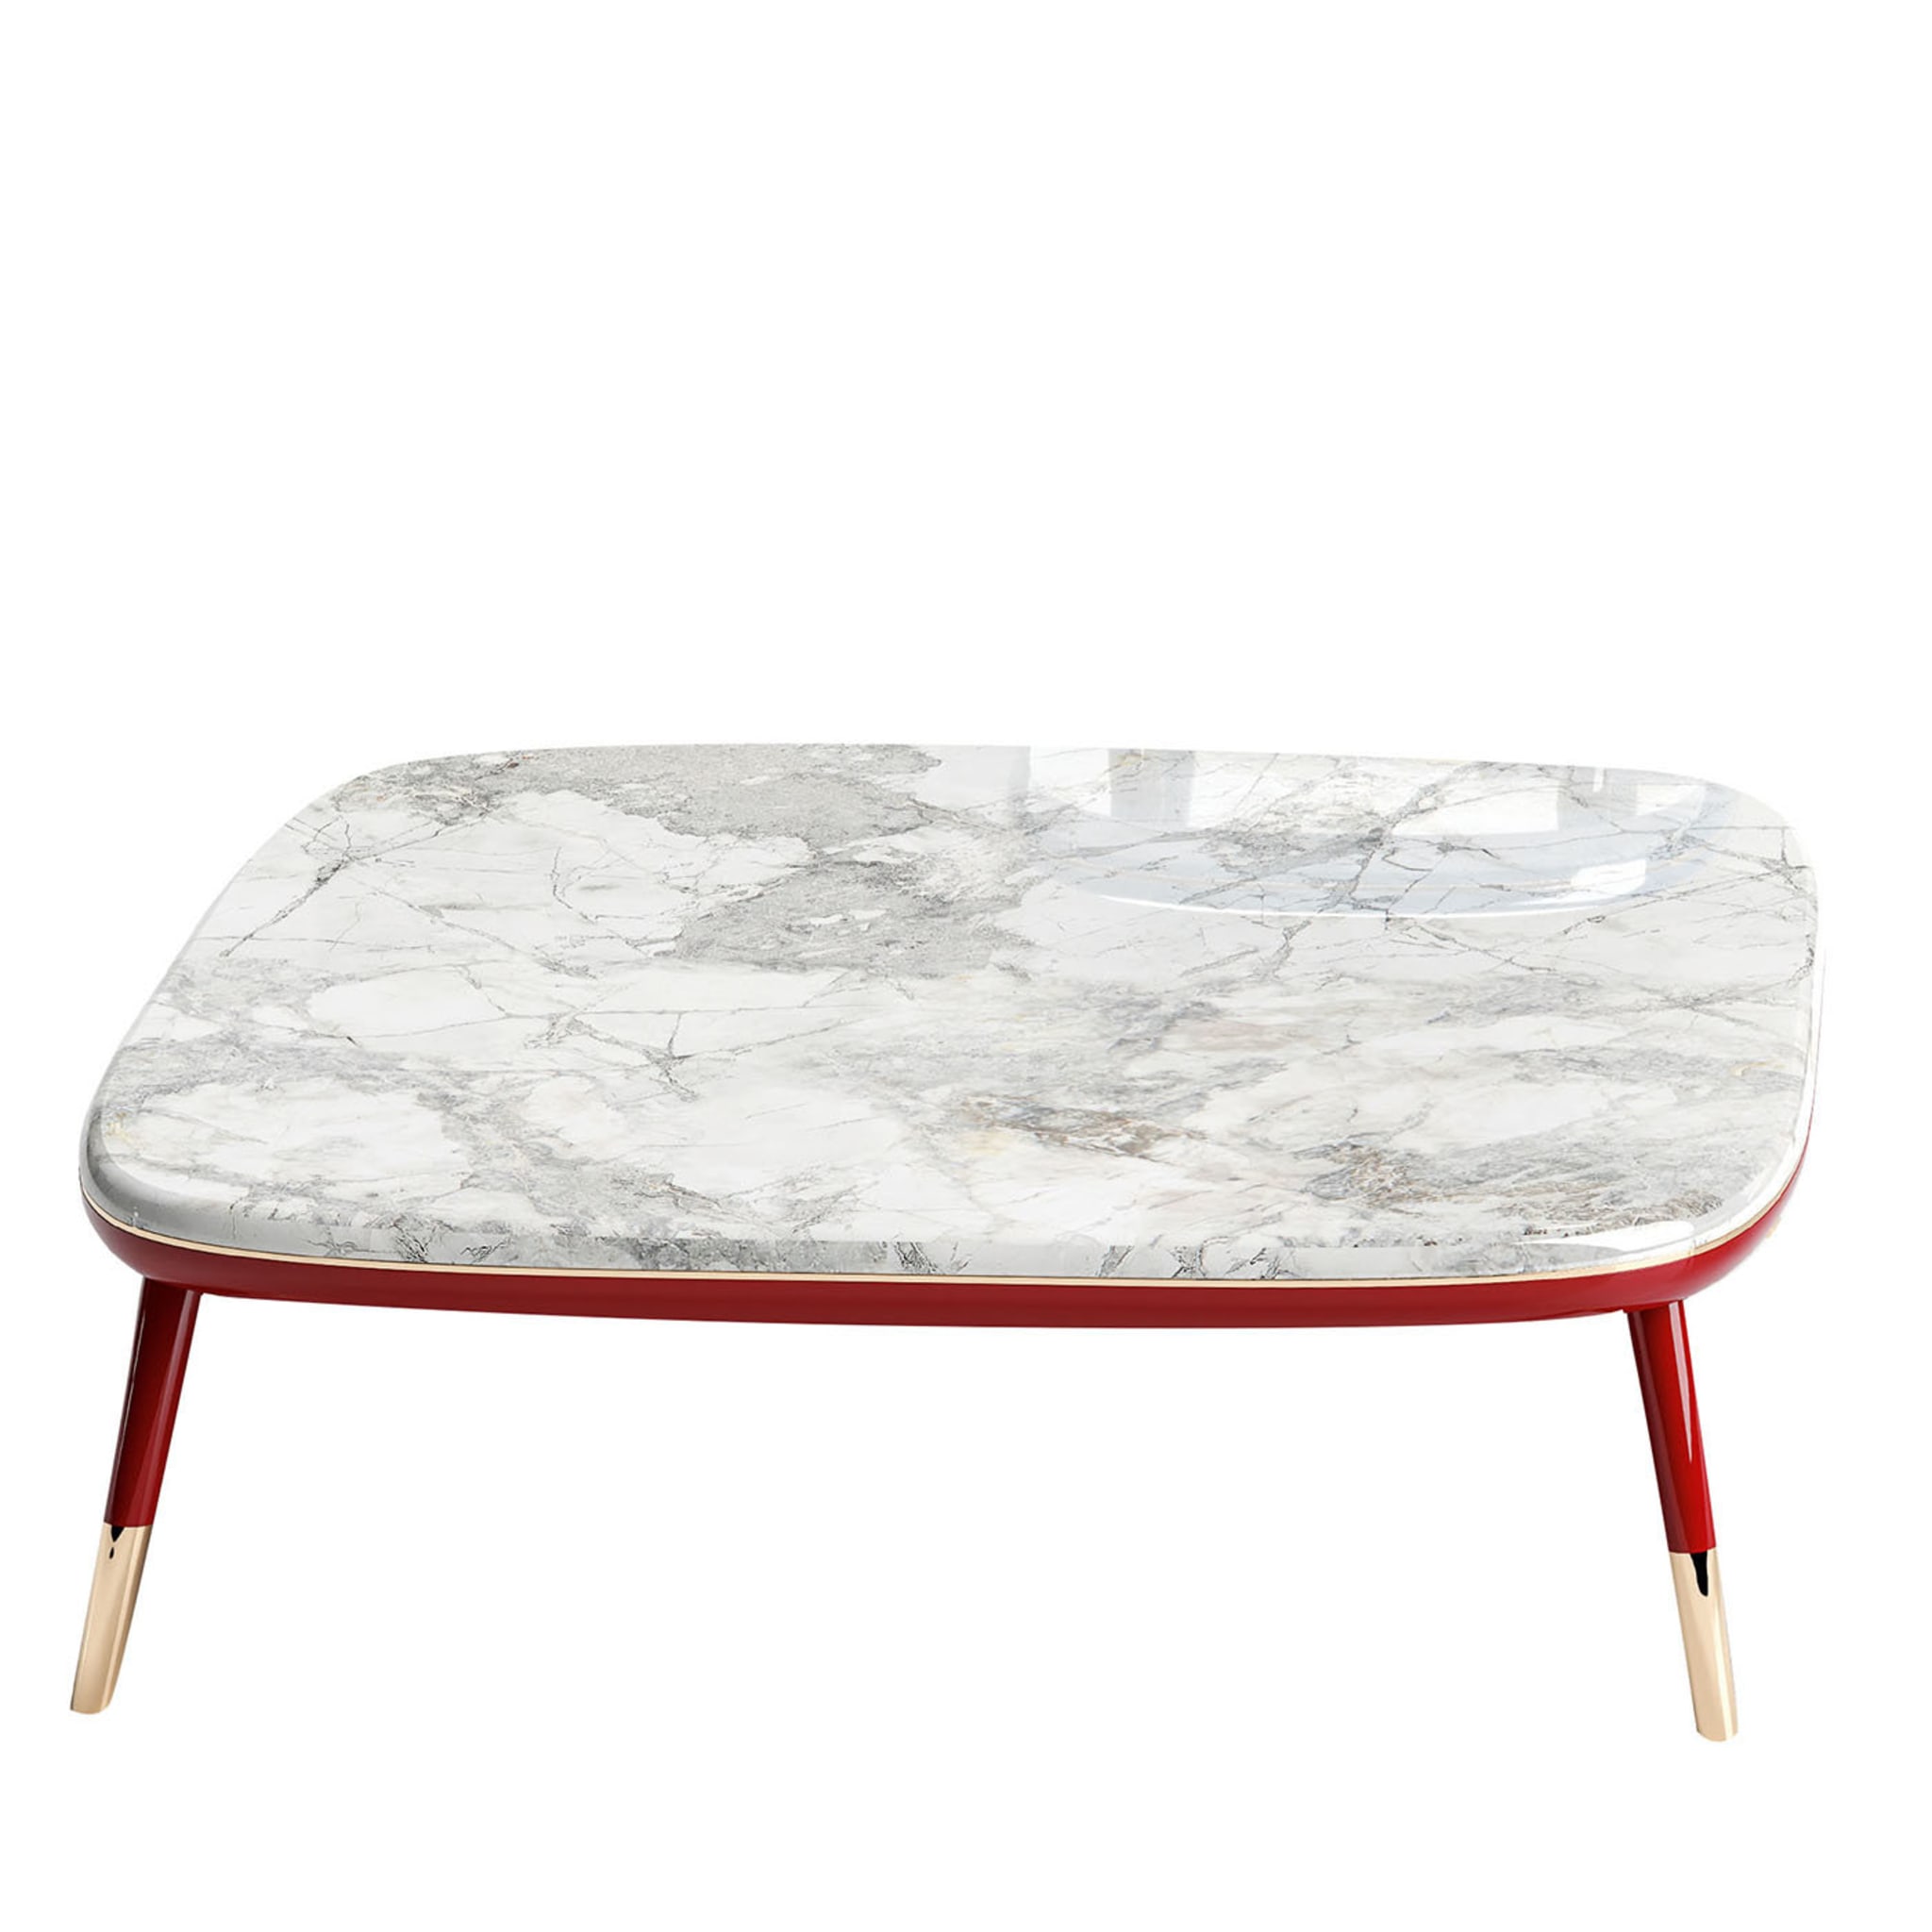 Sabrina Red Coffee Table with Marble Top - Main view